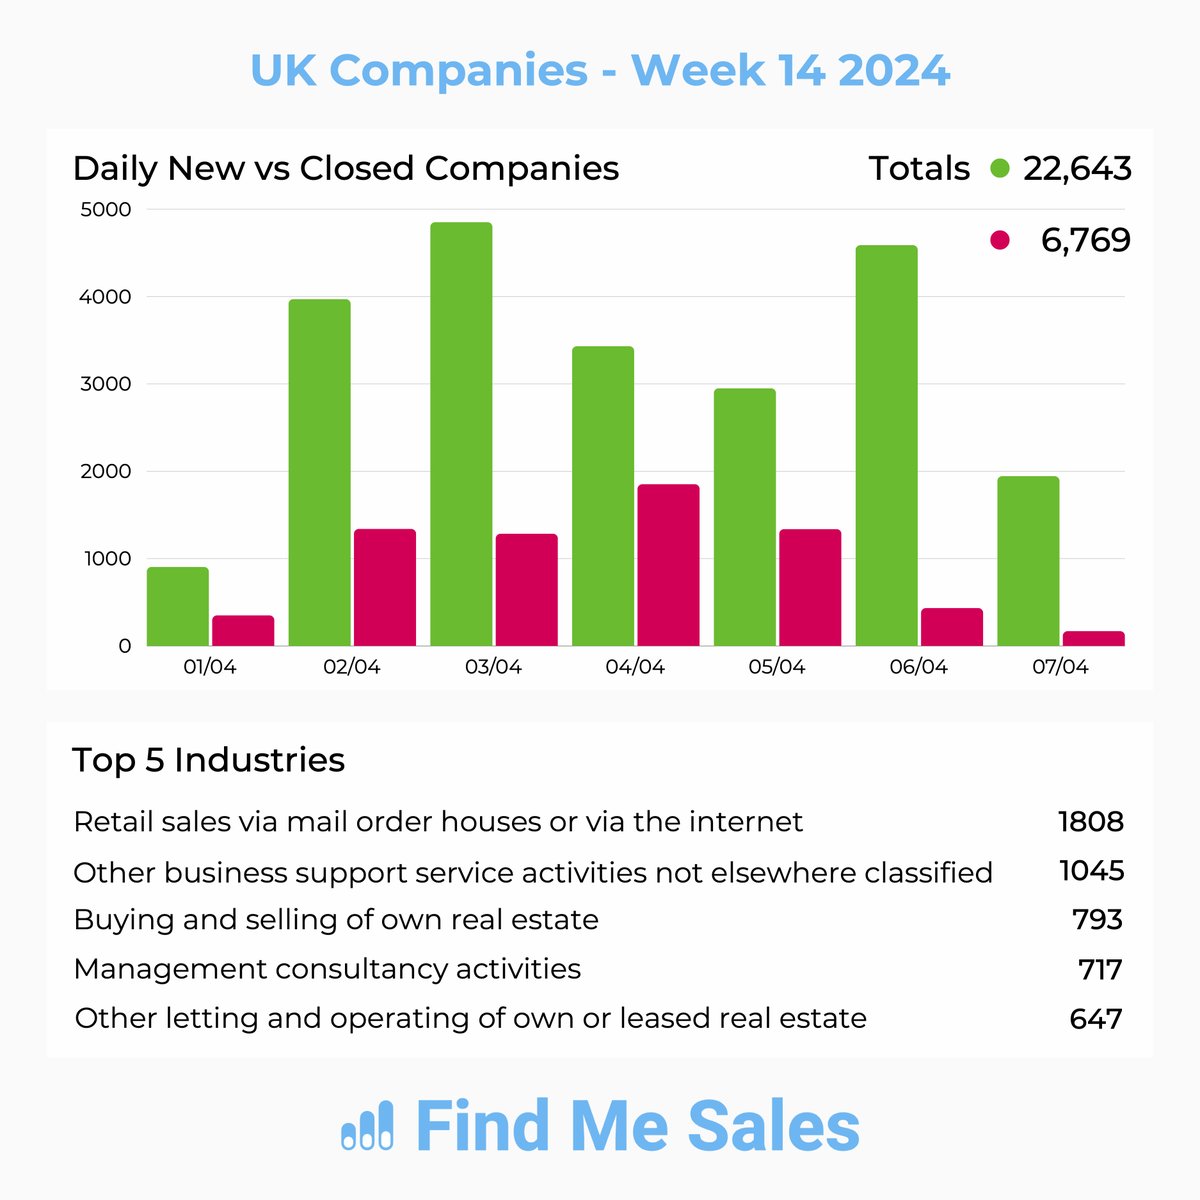 🎉 UK sees record new businesses post-Easter & on Super Saturday! 

📈 E-commerce at a 10-week peak. 

Dive into the UK business with Leadsearch by Find Me Sales.

Unlock industry data with our free CRM.

#UKBusiness #EconomicGrowth #CRM #StartupUK #FreeCRM #Sales